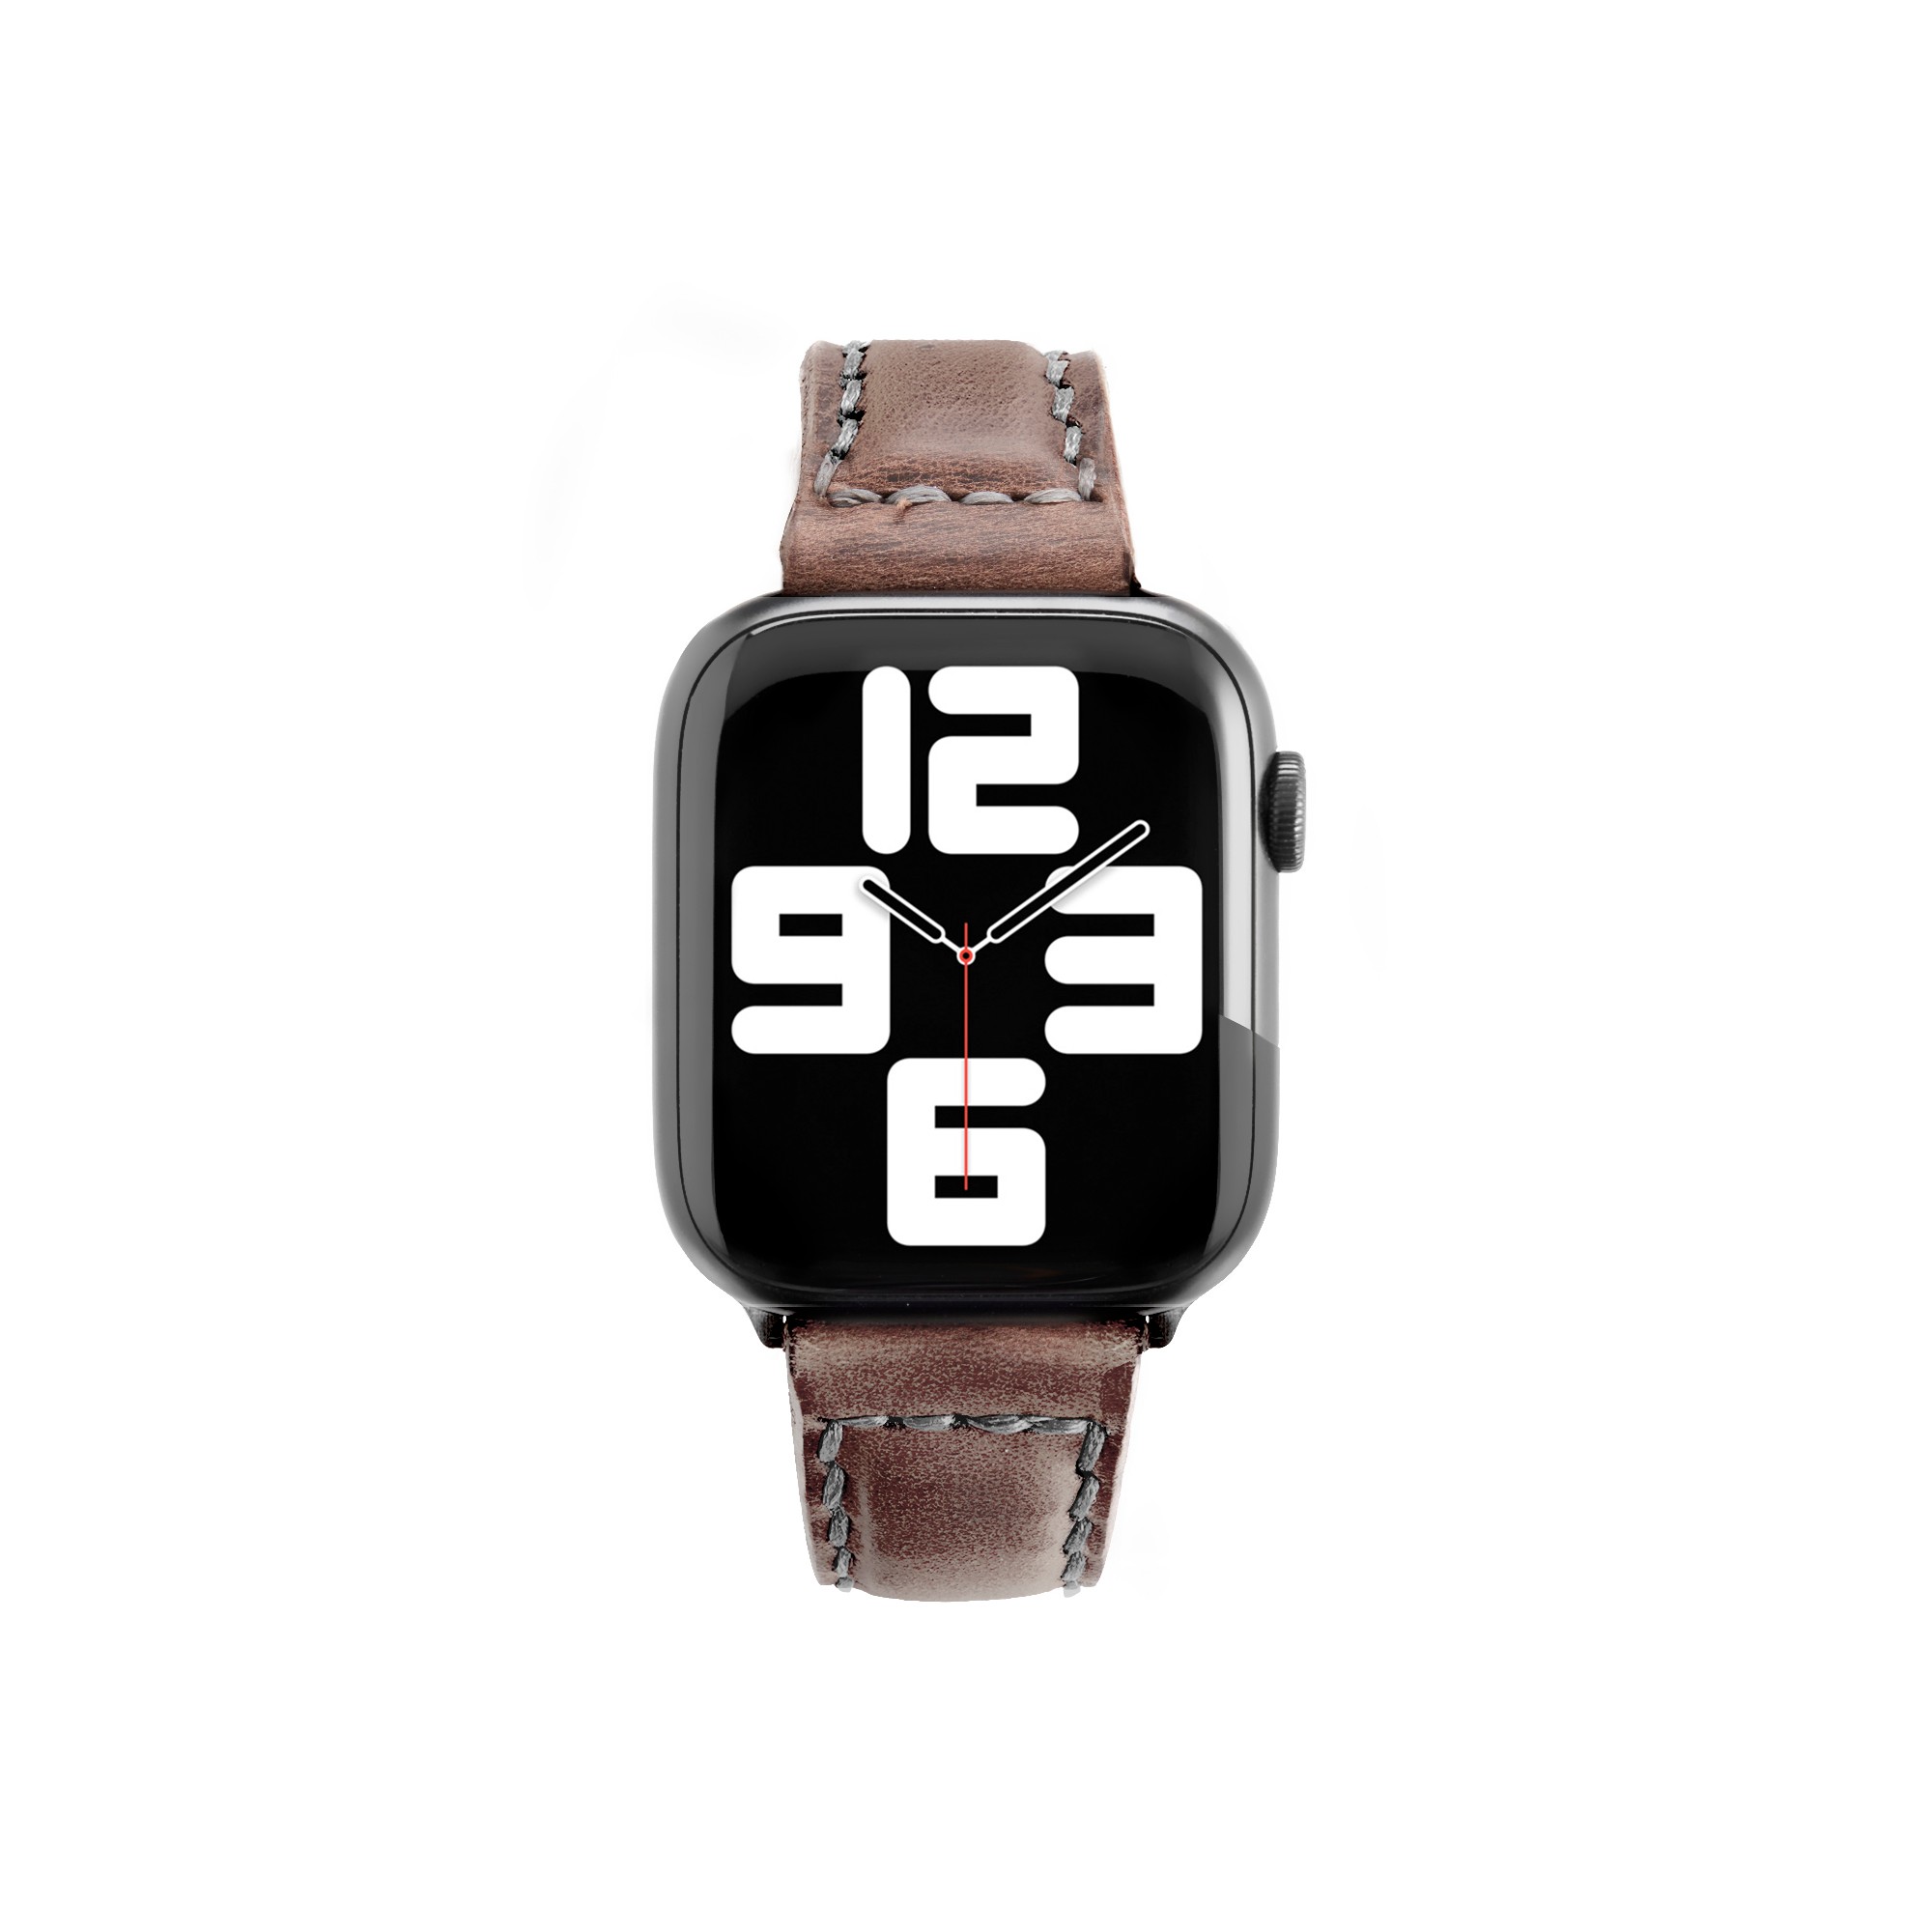 Apple Watch Double Layer Leather Band - Walnut